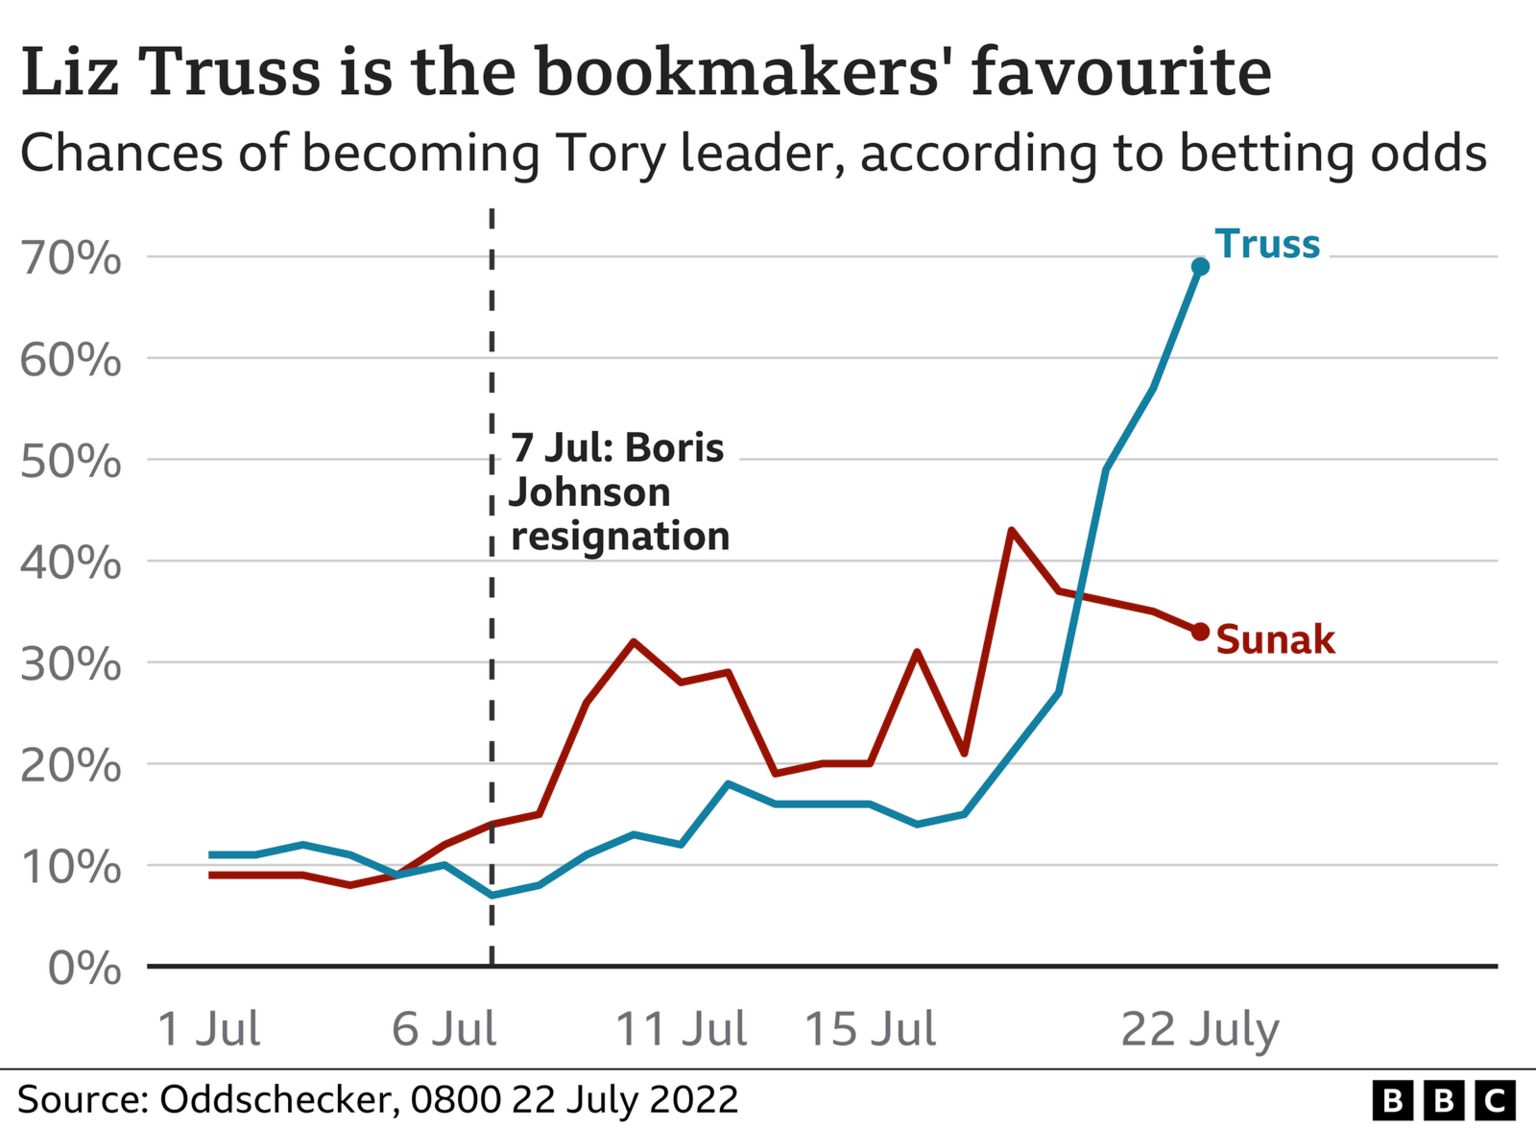 Bookmakers' odds on the Tory leadership contest